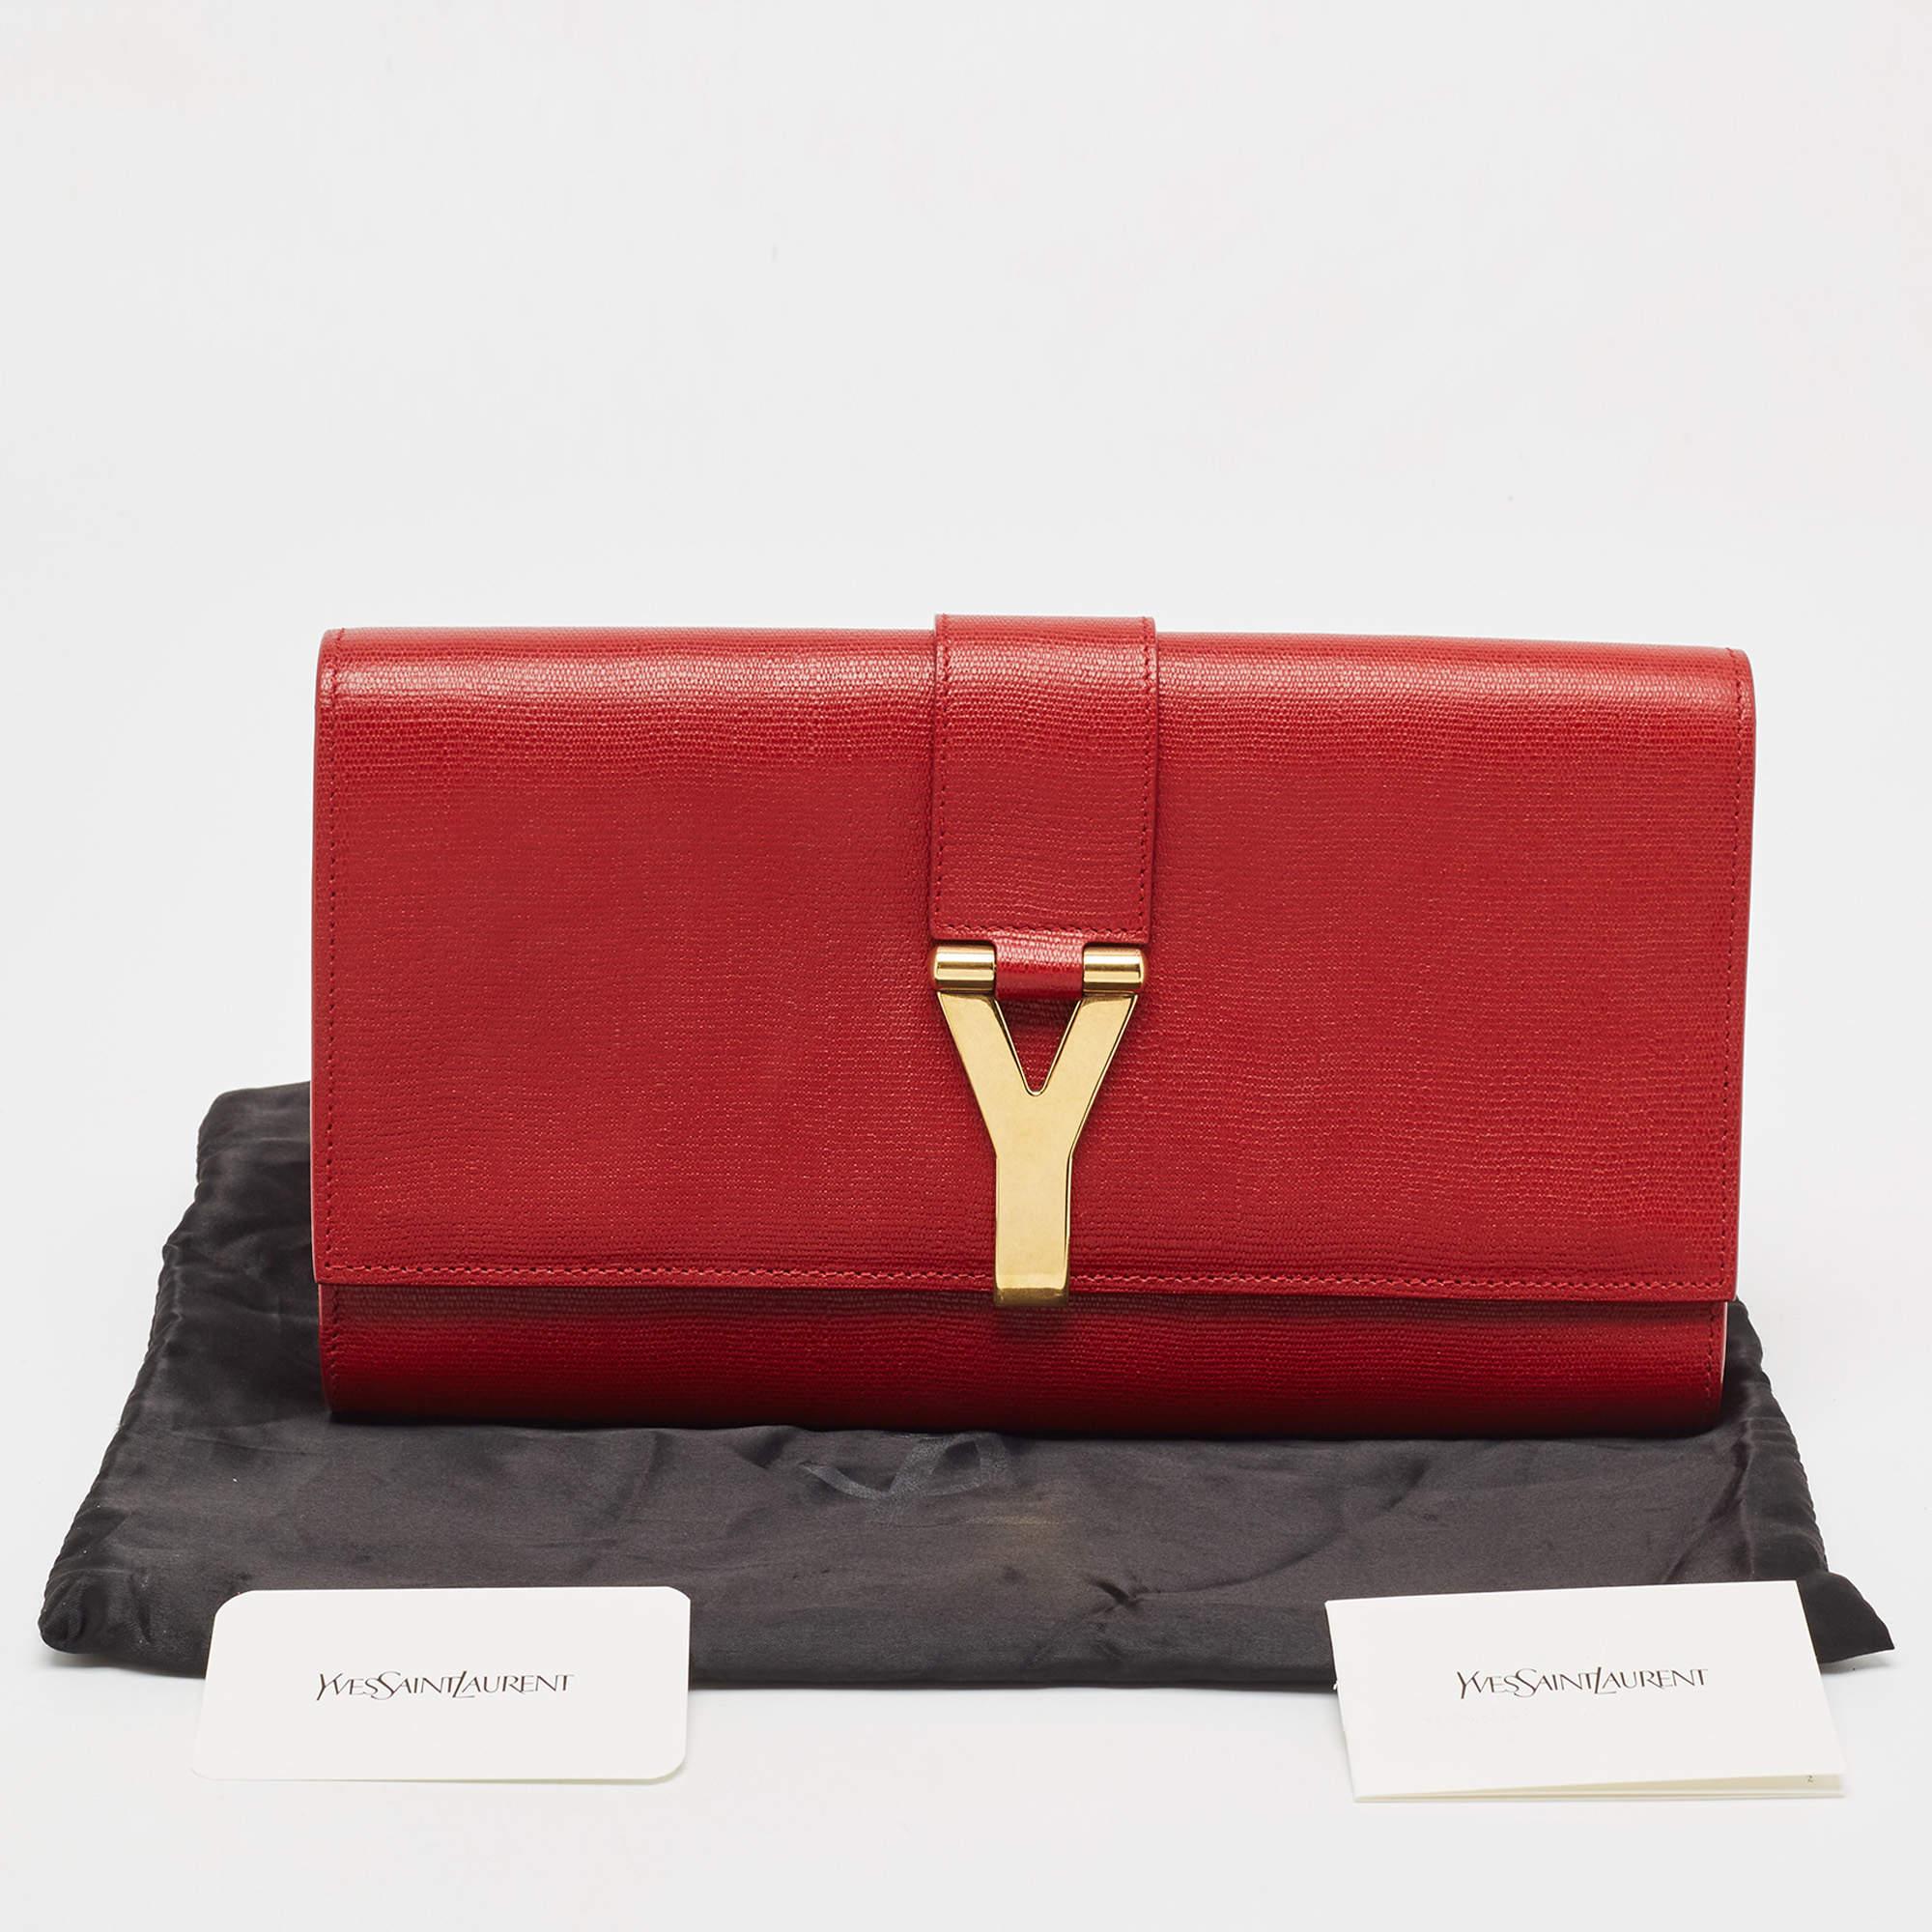 Yves Saint Laurent Red Leather Y-Ligne Clutch For Sale 2